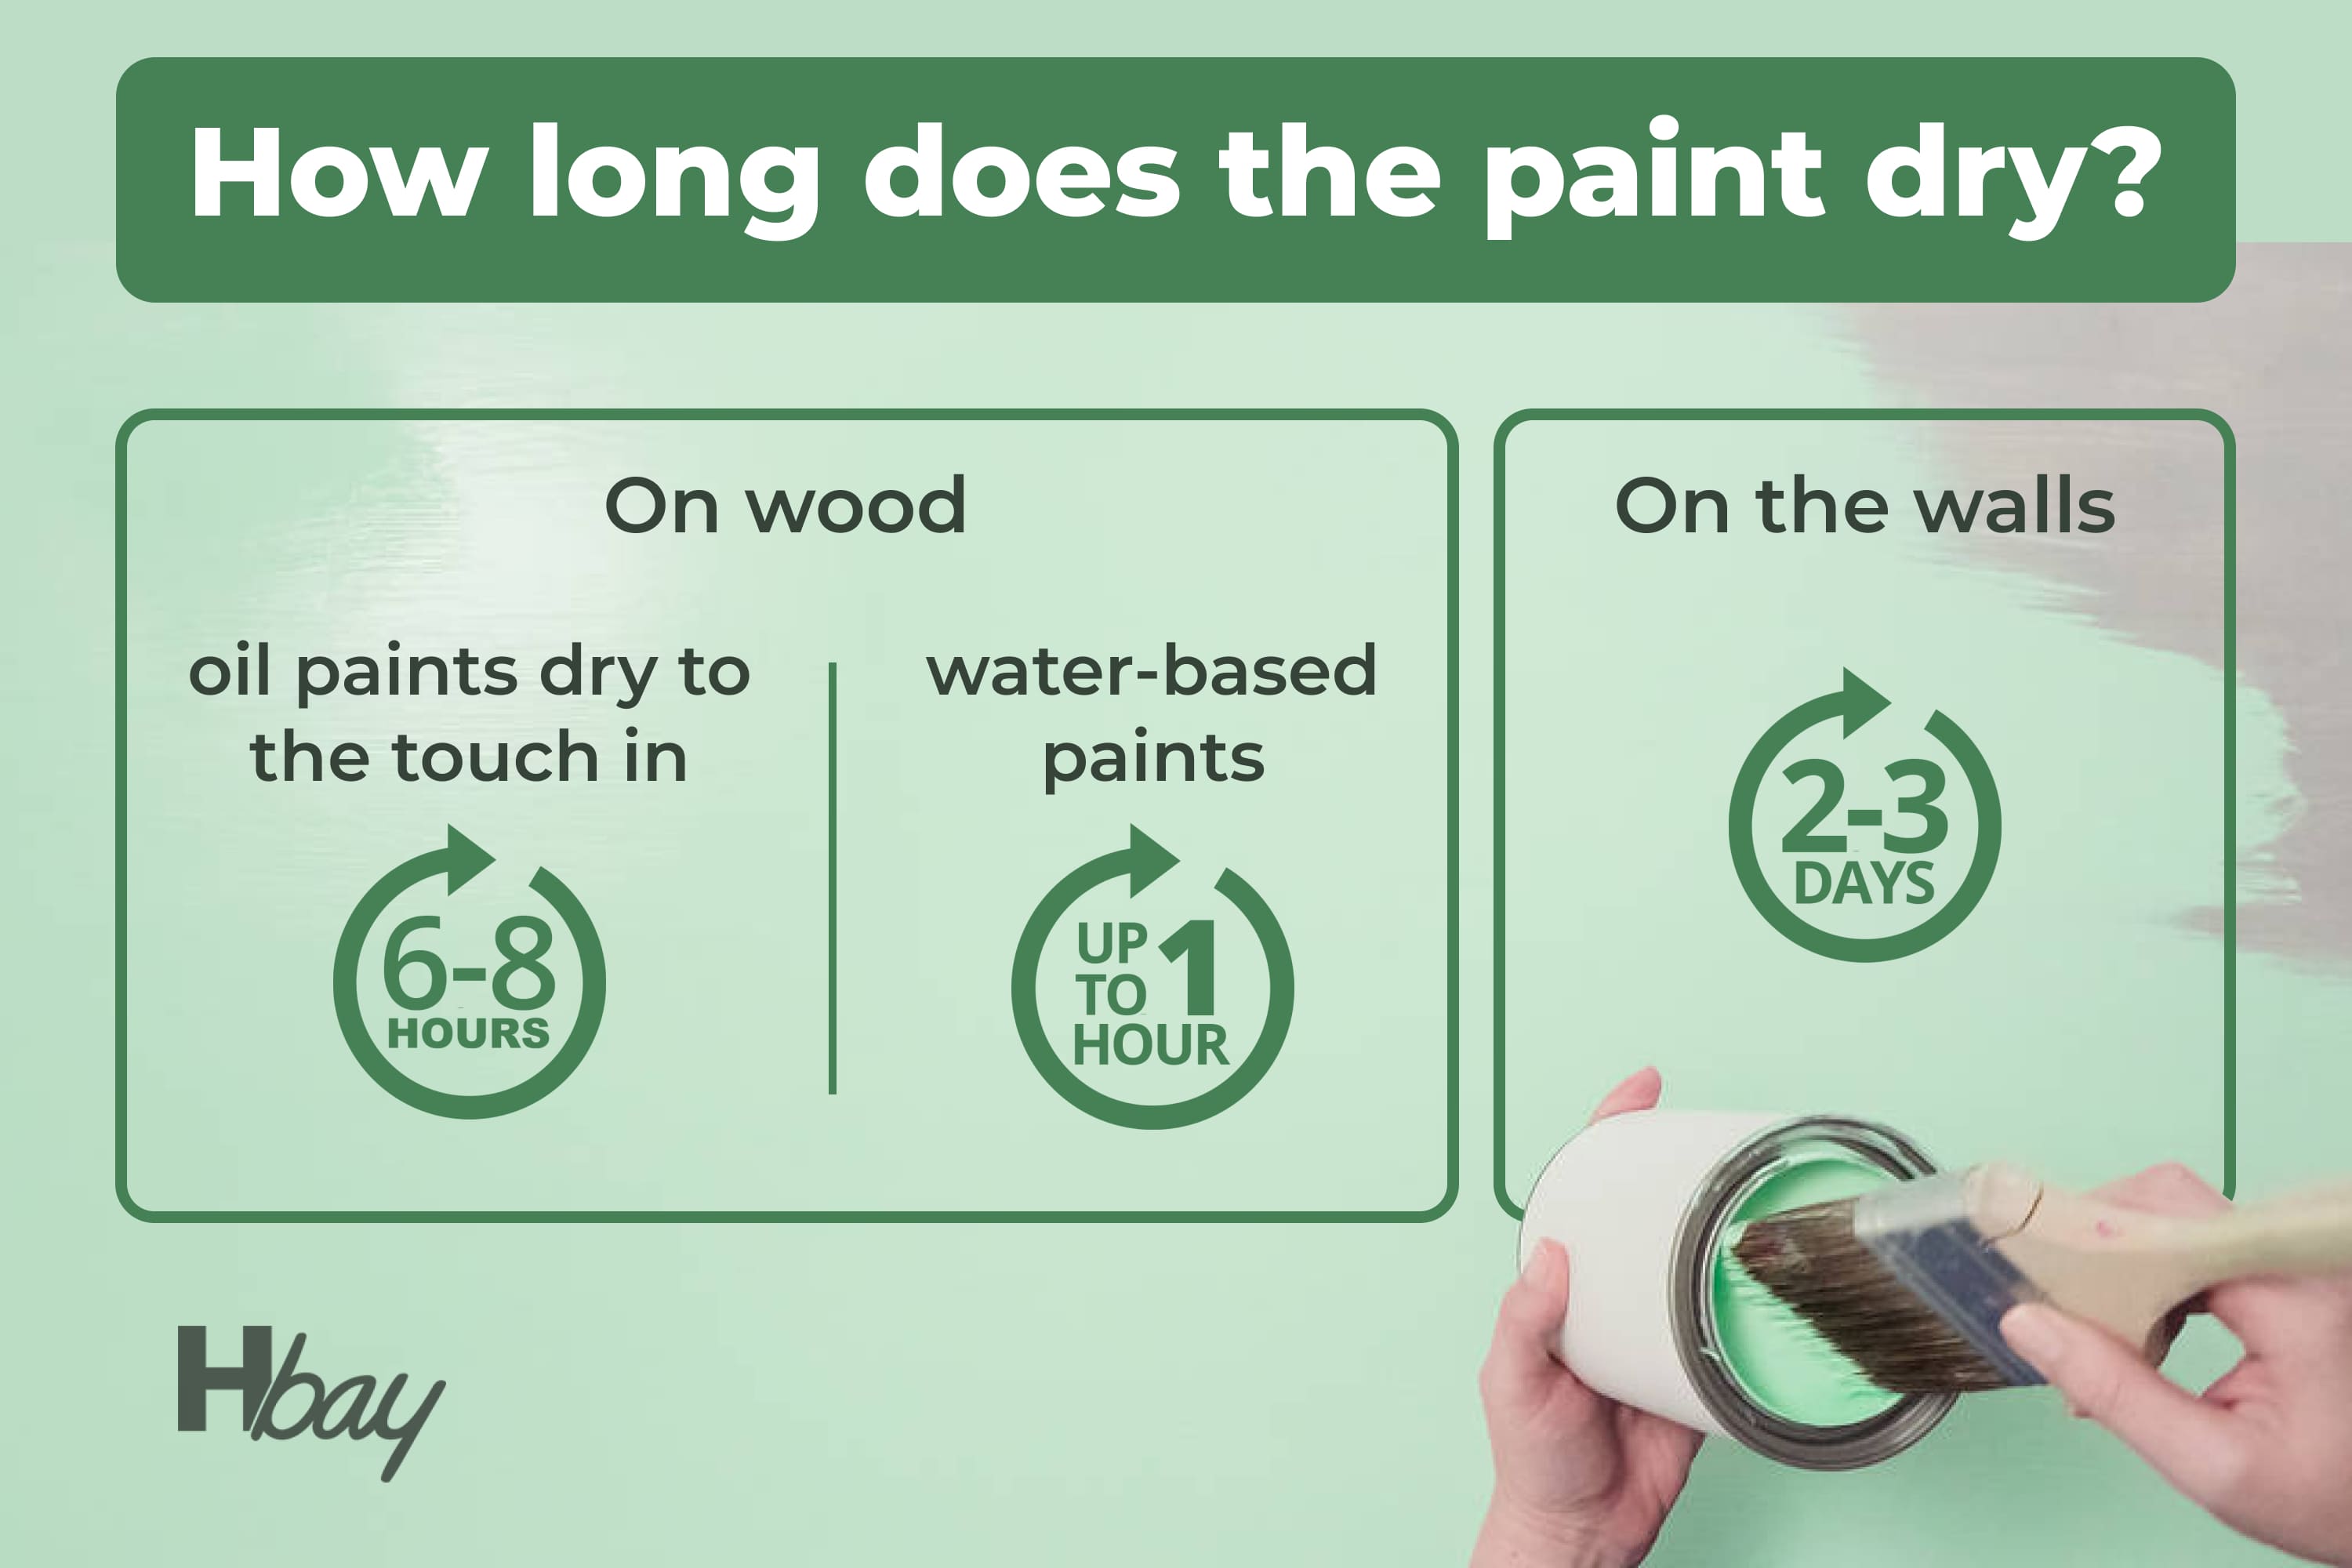 How long does the paint dry